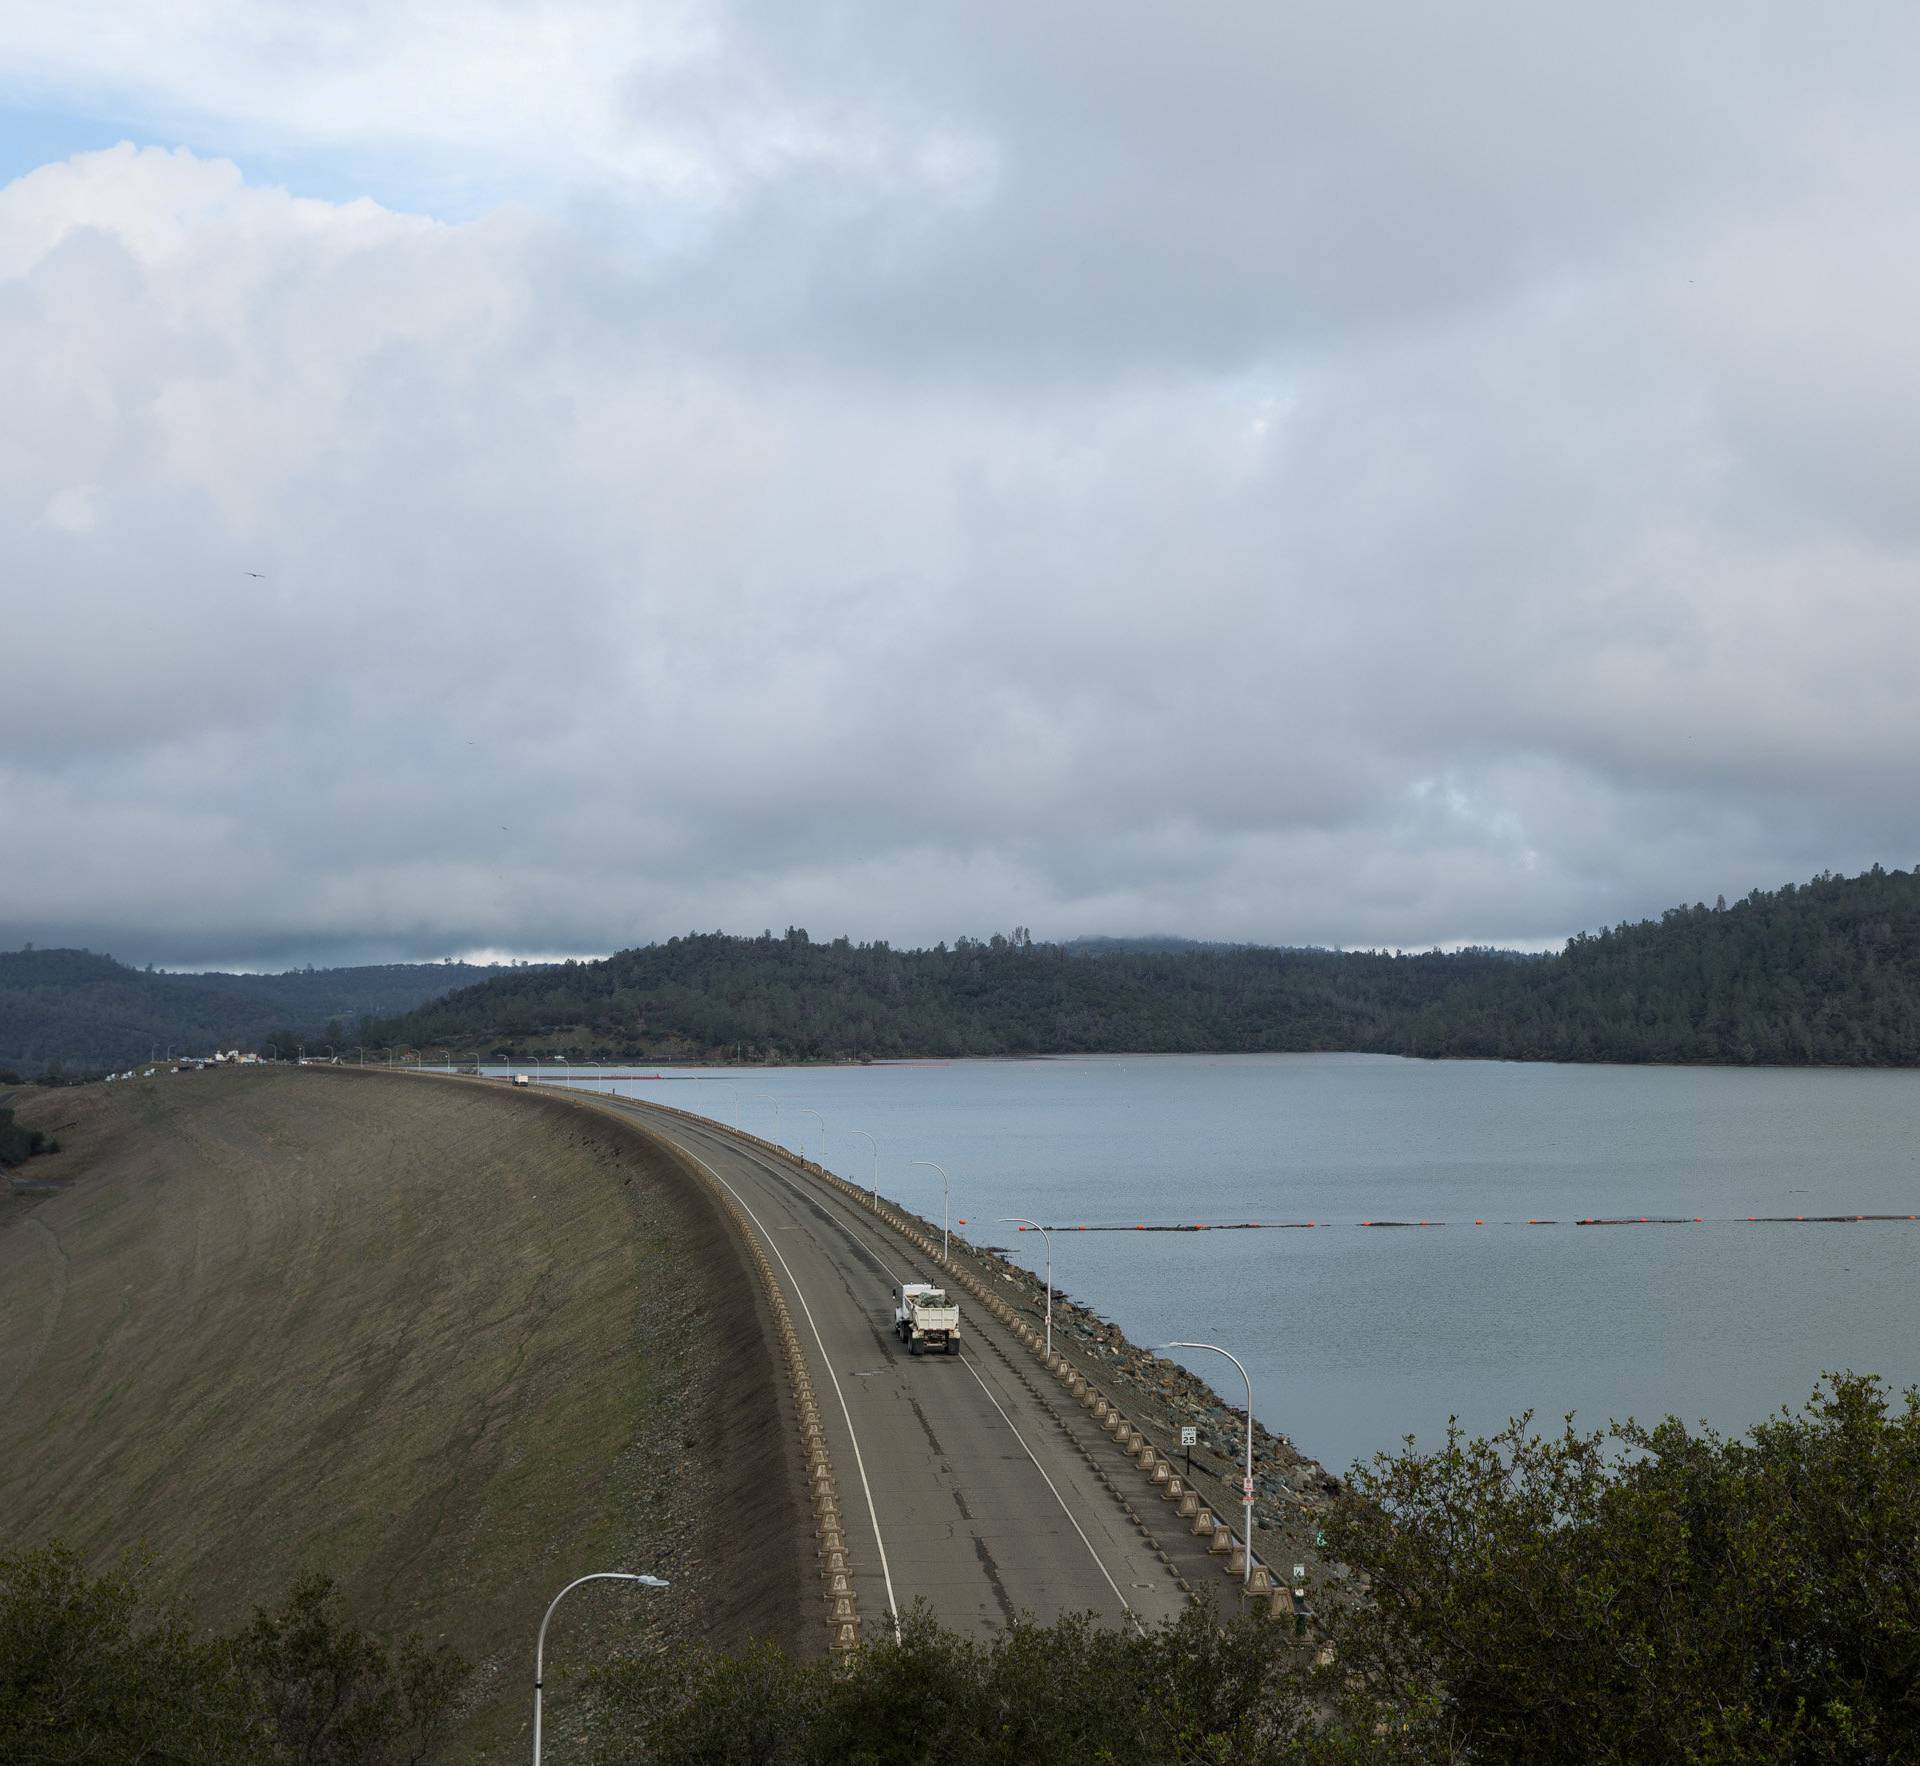 FILE PHOTO: The Oroville reservoir level is seen very close to the top of Oroville Dam in Oroville, California